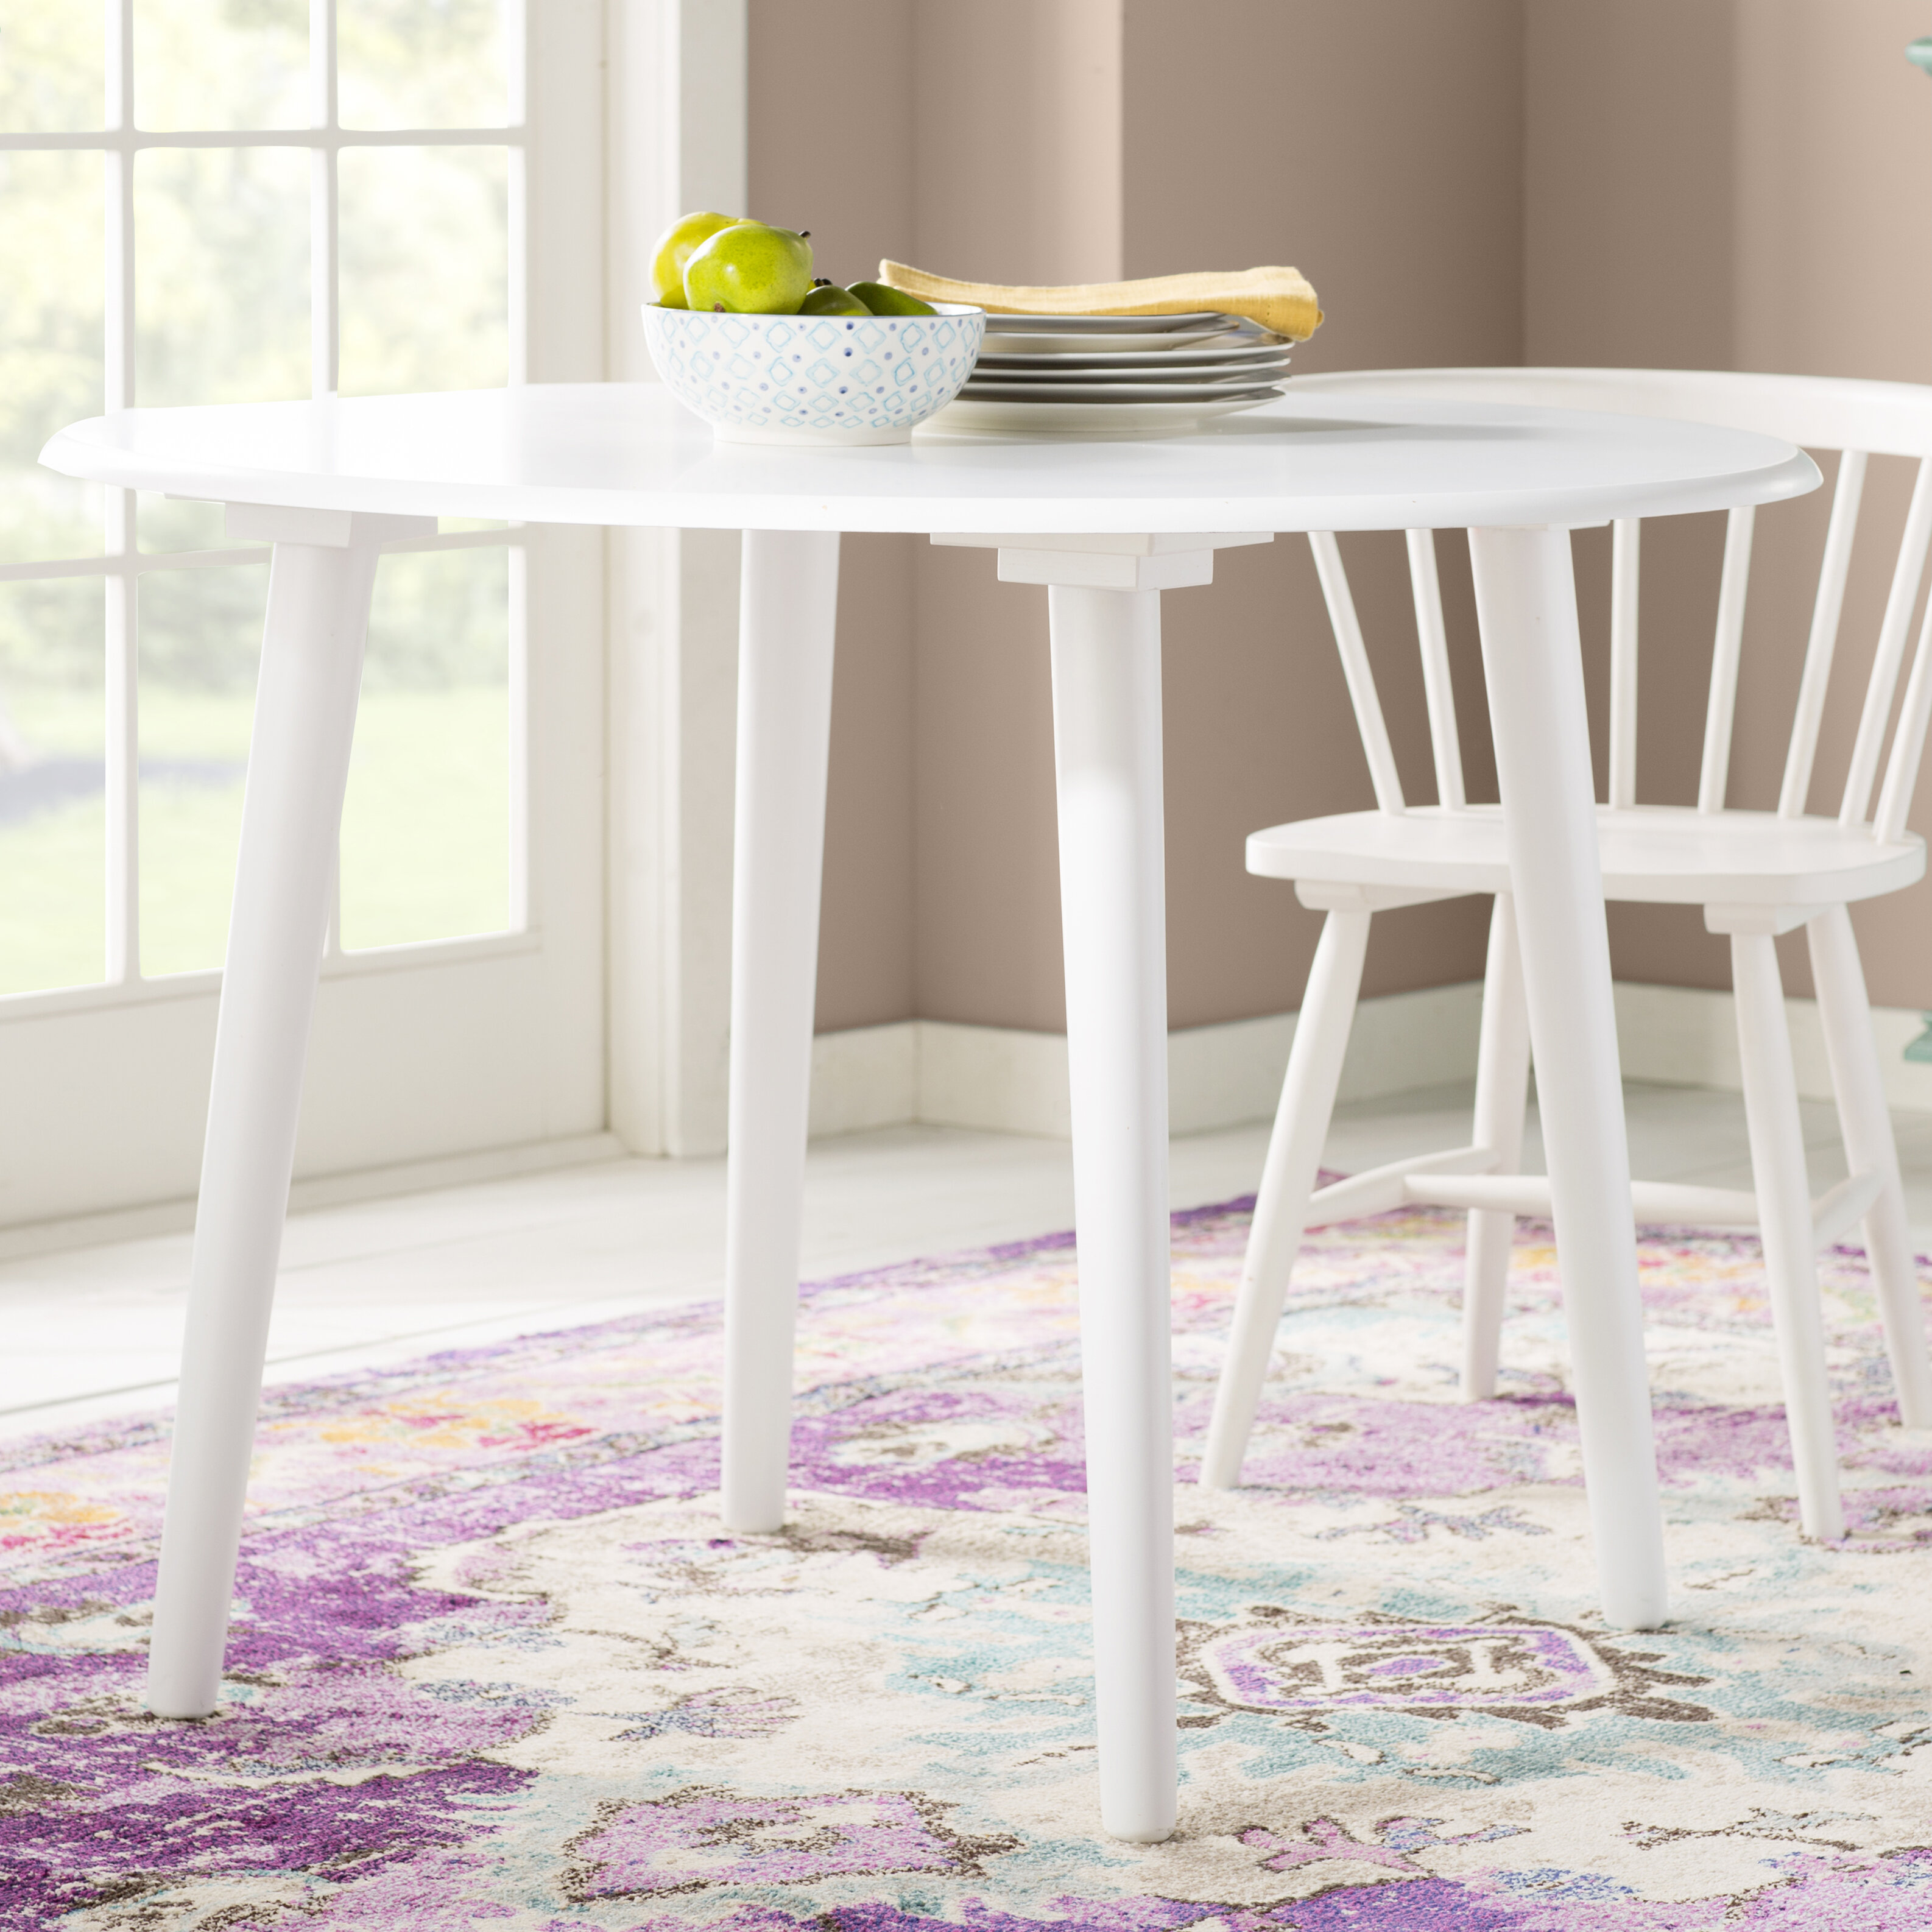 42″ Tall Round Table